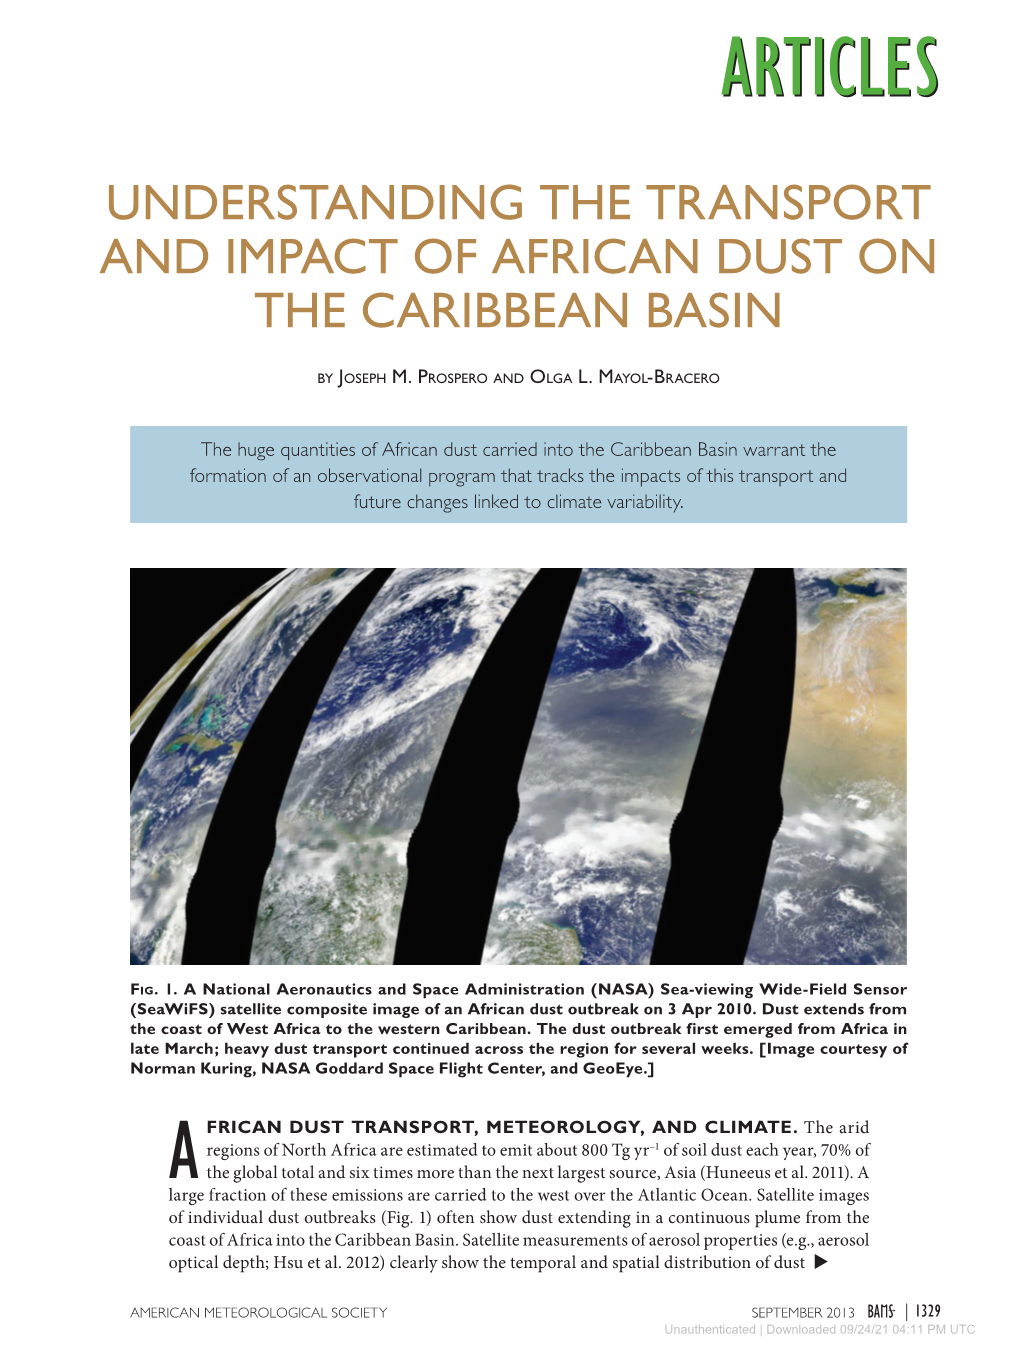 Understanding the Transport and Impact of African Dust on the Caribbean Basin